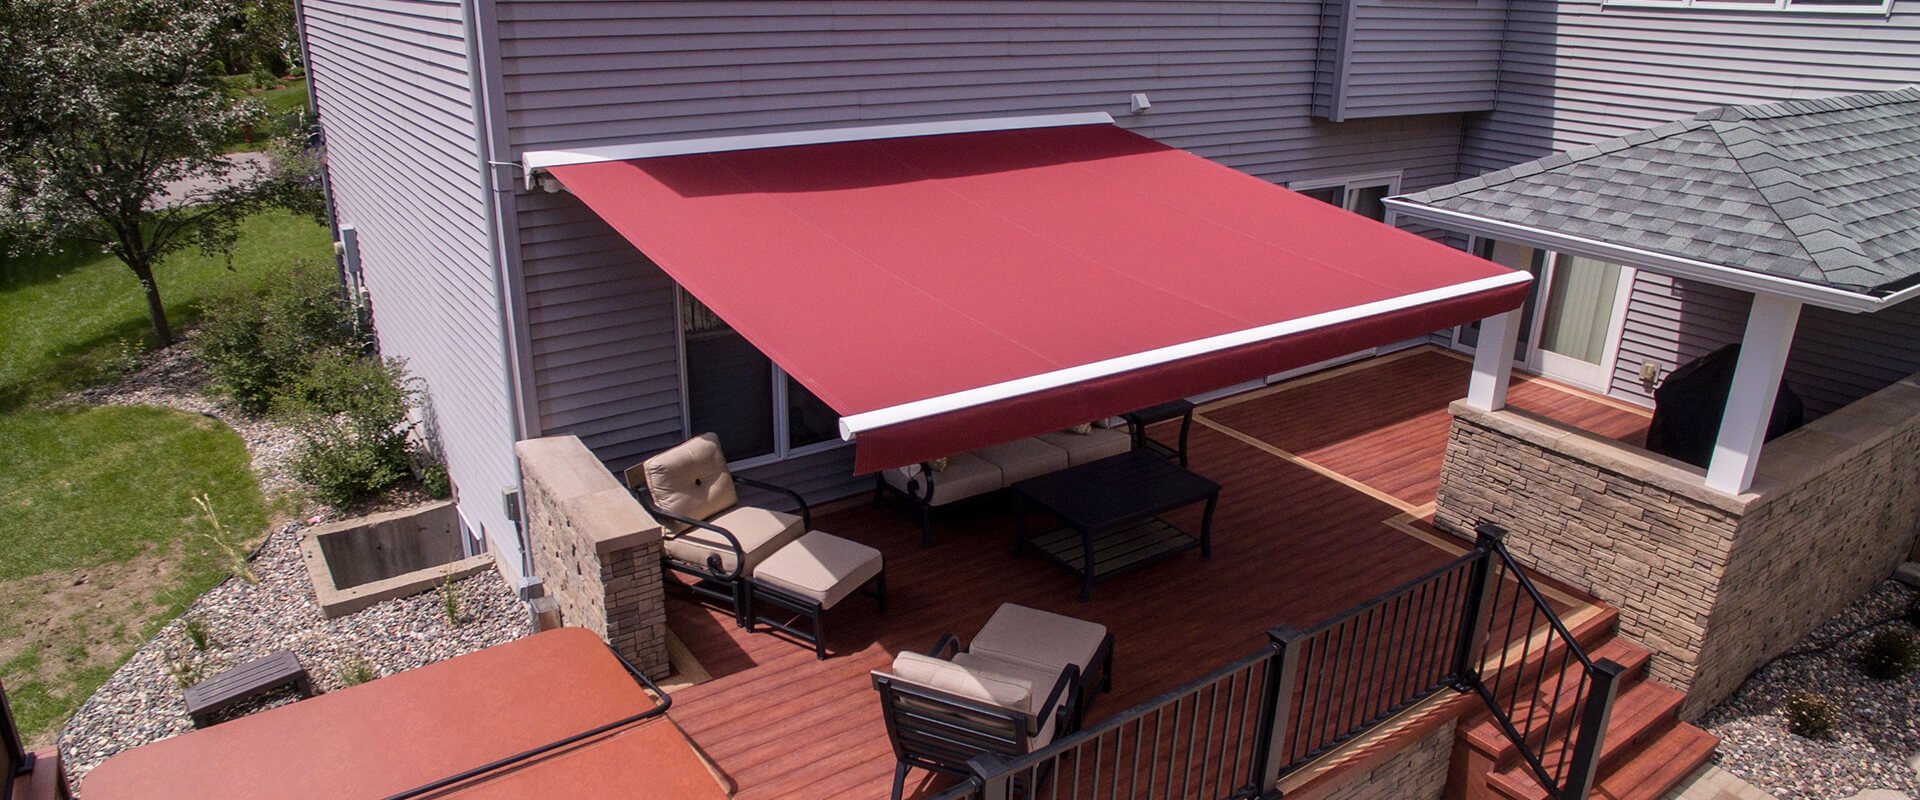 Give Your Awnings a Fresh Look With New Fabric